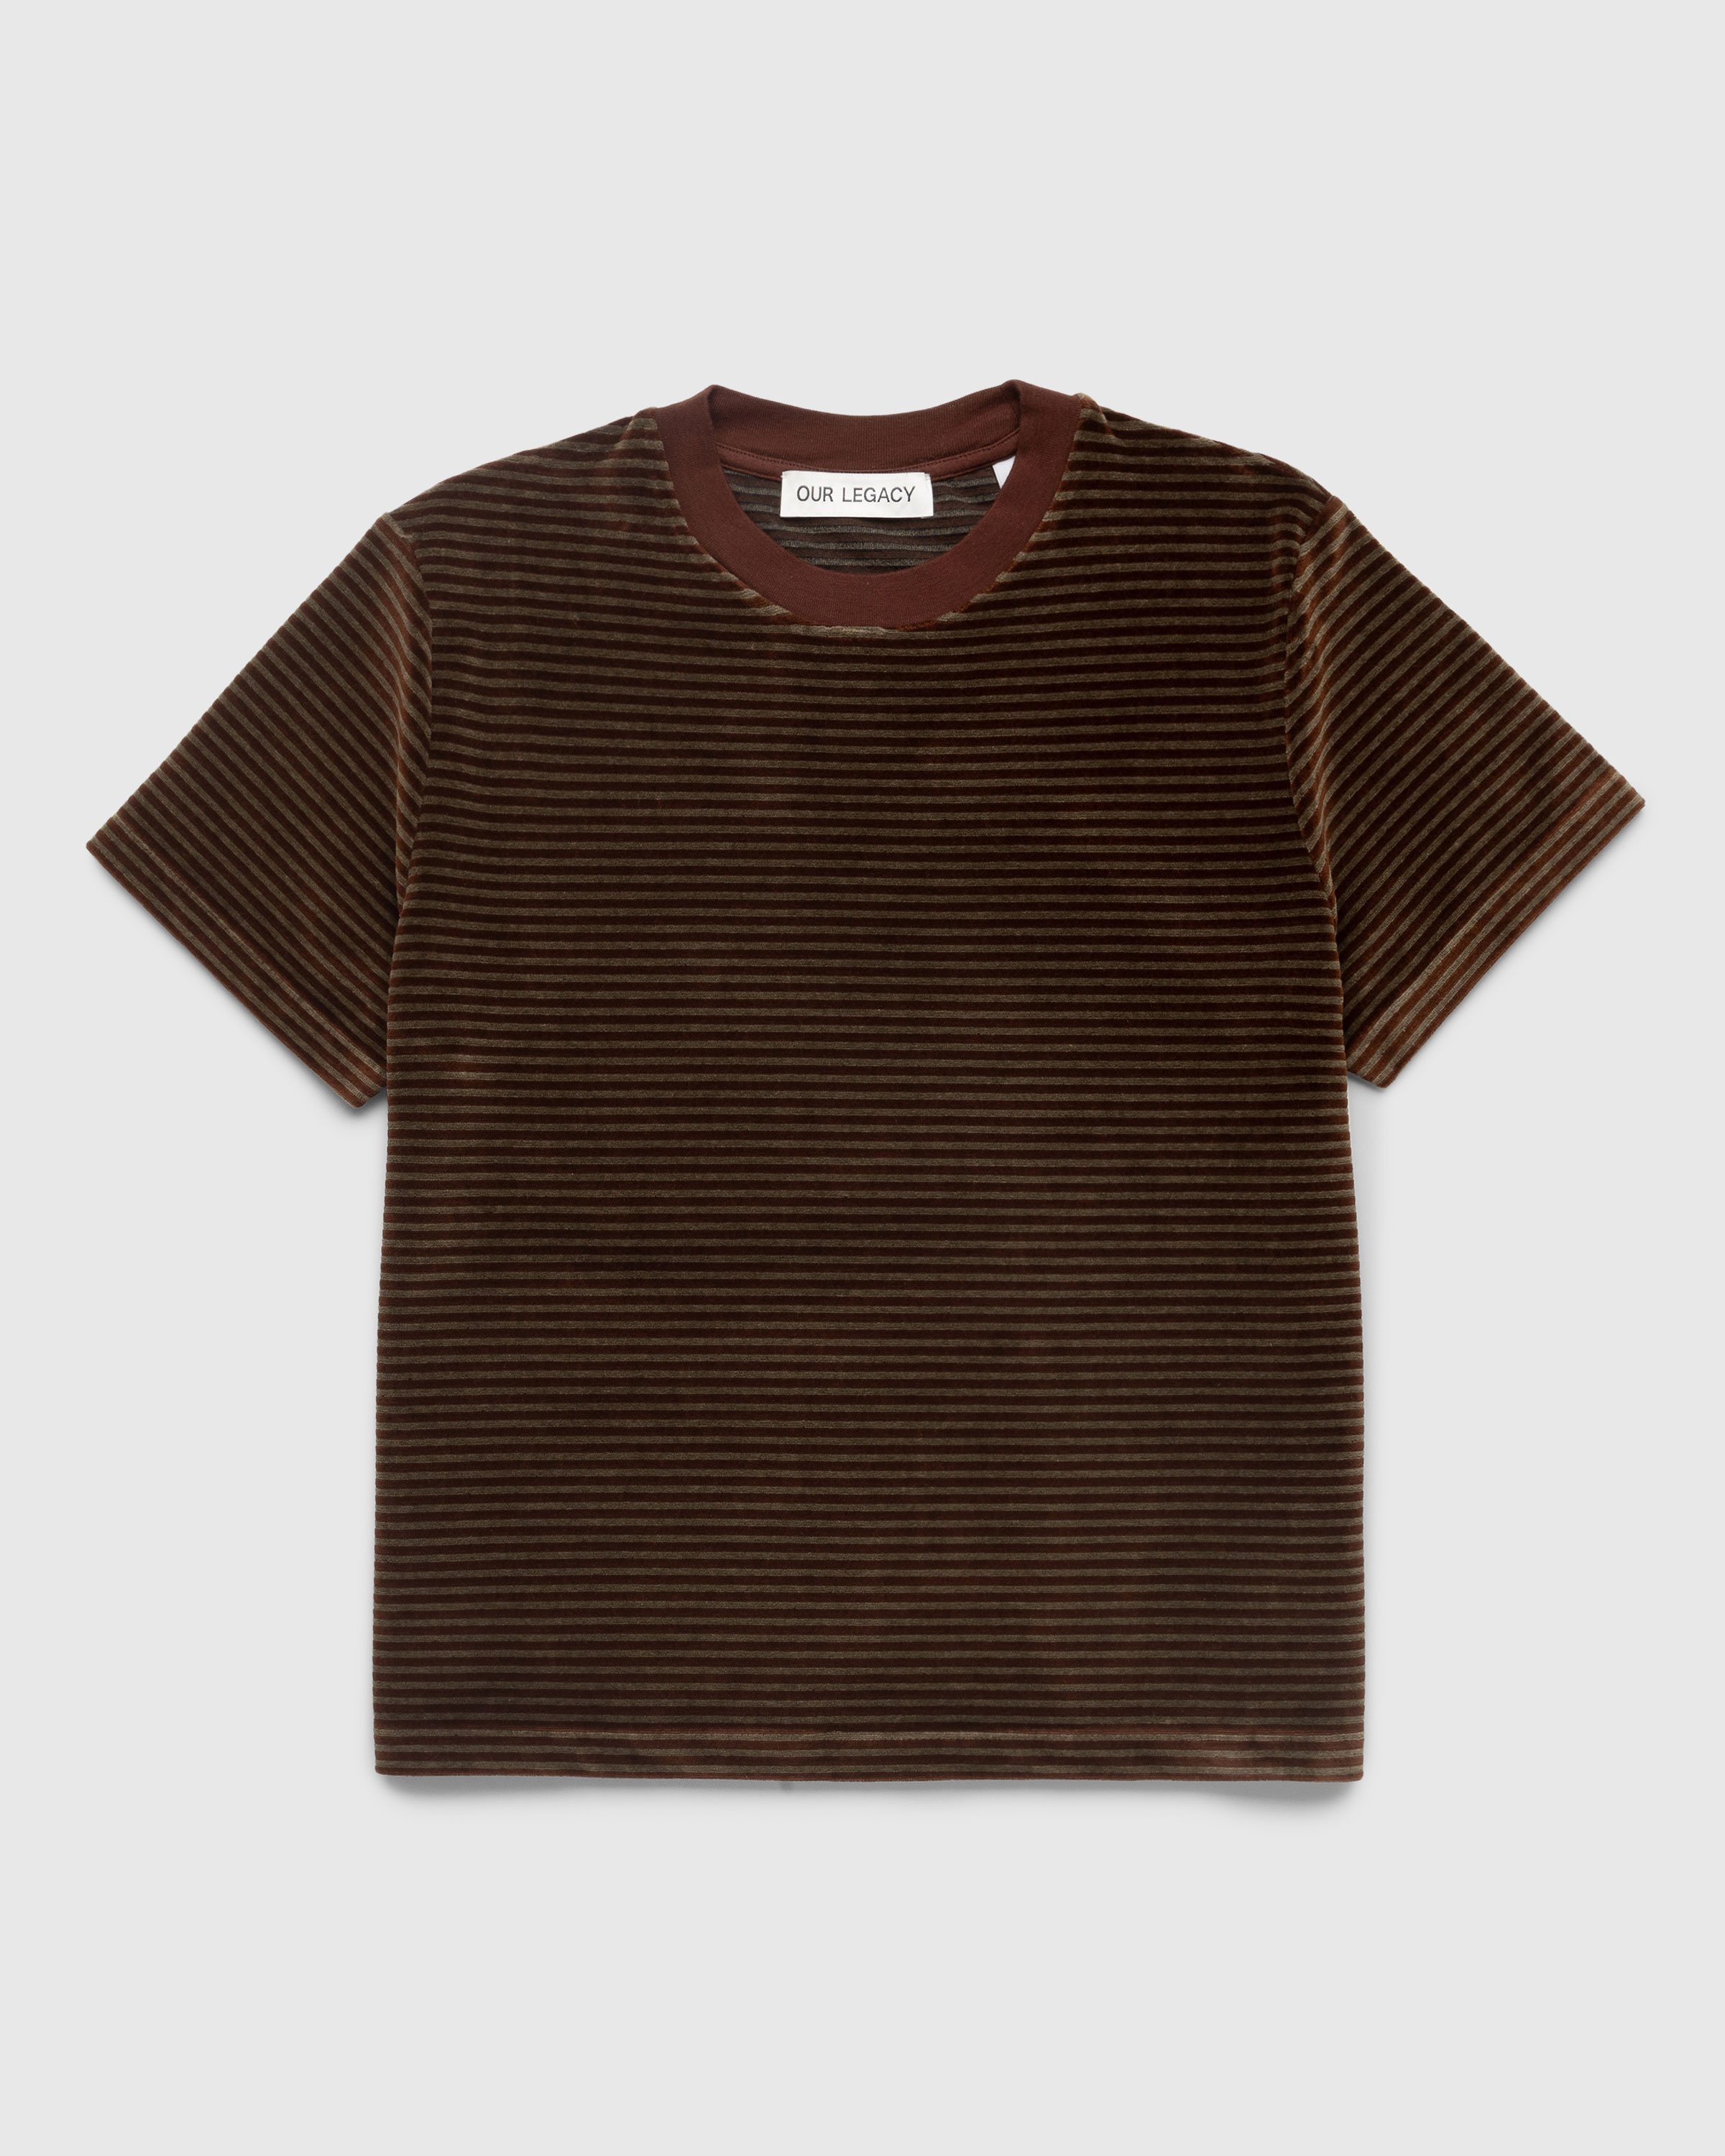 Our Legacy - HOVER T-SHIRT Brown - Clothing - Brown - Image 1